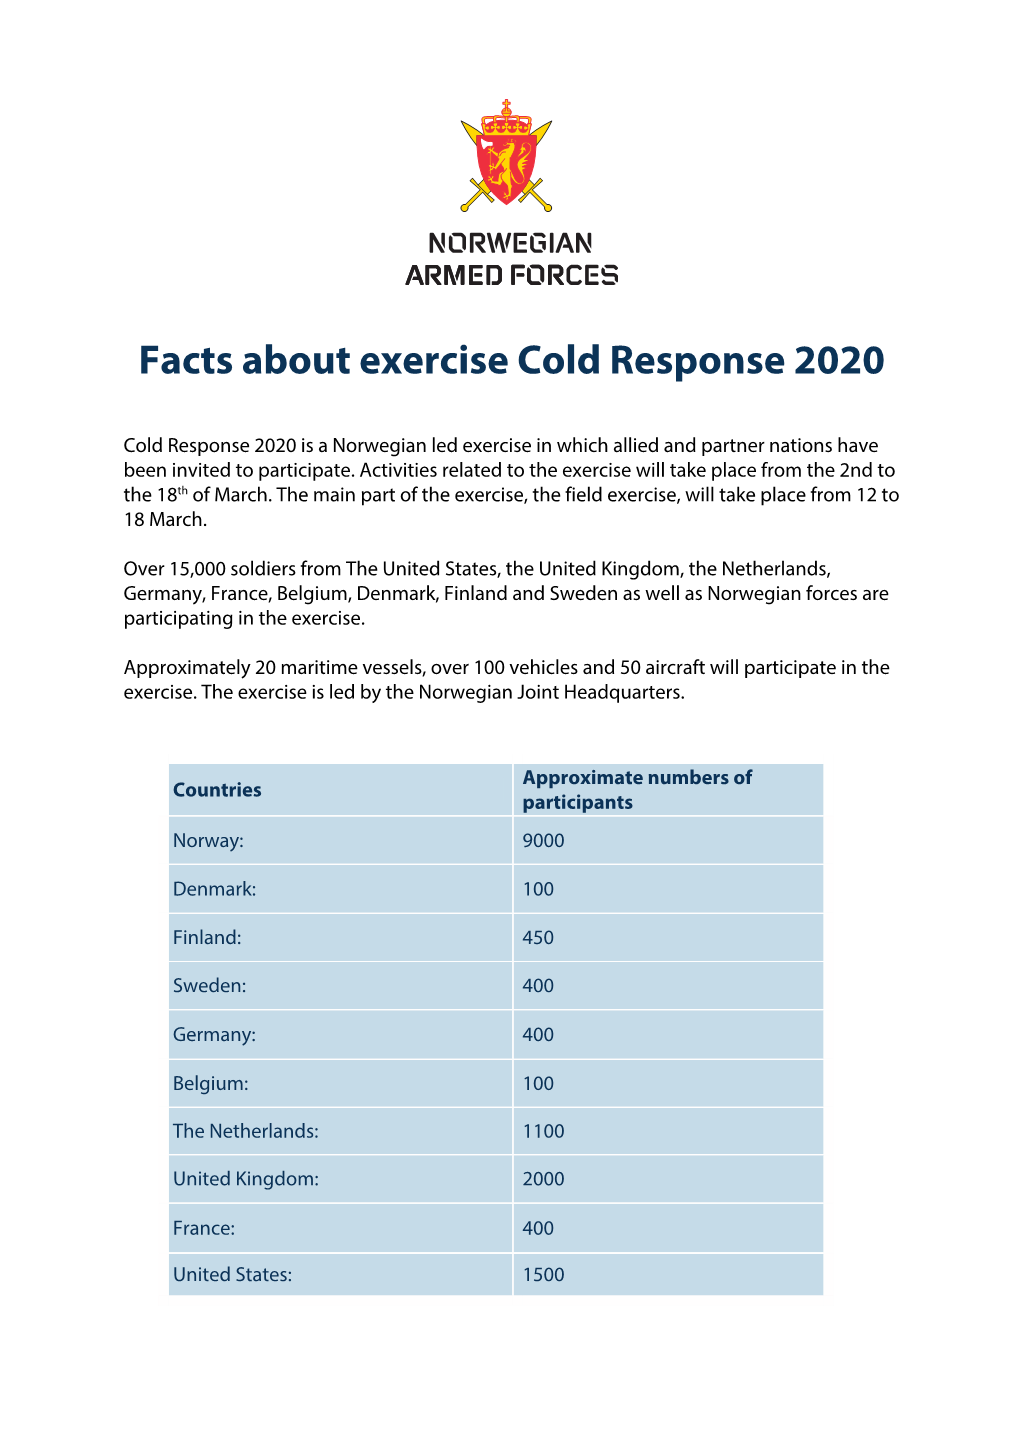 Facts About Exercise Cold Response 2020